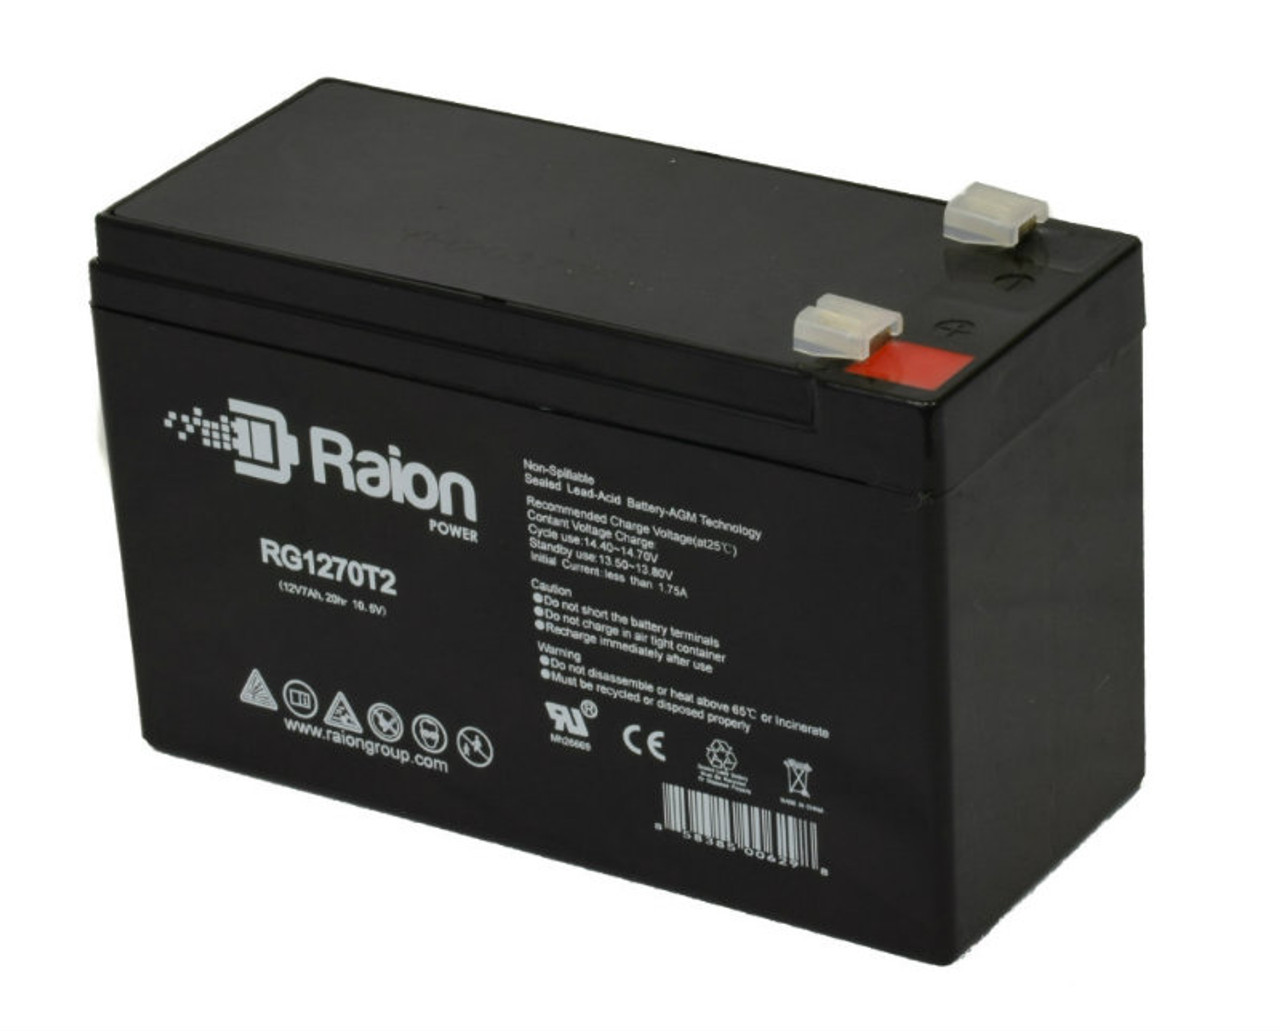 Raion Power RG1270T1 12V 7Ah Non-Spillable Replacement Battery for Hisel Power SSP12-7 F1